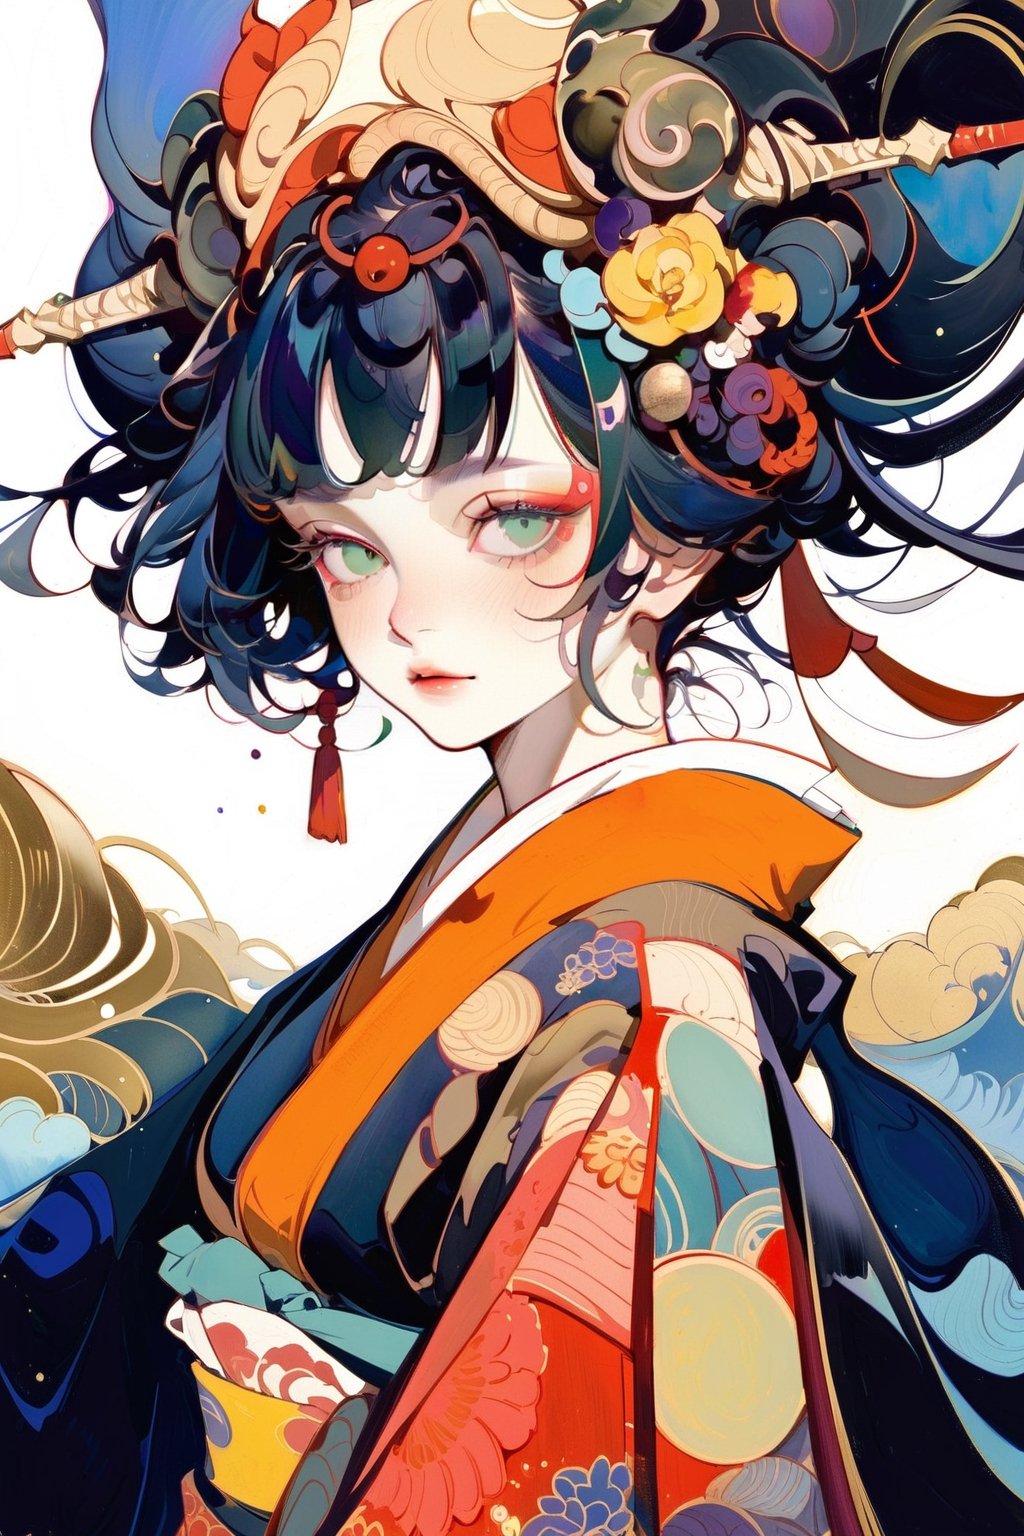 high resolution,  ultra detailed,  (masterpiece:1.4), taeri,  busty, super photo realistic illustration, highres, ultla detailed, absurdres,  best quality,

 from front  shot, looking away, close up shot, face focus, head shot,

1 beautiful woman, oiran girll, female oiran, vibrant, kimono dress, ultra detailed eyes, colorful, darl background, kimono armor, vibrant color theme, exposure blend,  bokeh, (hdr:1.4), high contrast,  (cinematic,  teal and orange:0.85),  (muted colors,  dim colors,  soothing tones:1.3),  
BREAK

(god bless you:1.3),
compassionate expression, empathetic, caring, kind, content expression, satisfied, pleased, gratified, thoughtful expression, pensive, reflective, contemplative, determined expression, resolute, purposeful, firm,
BREAK

(colorful:1.5), glowing lights, pillar of lights, blooming light effect, papier colle, paper collage, layered compositions, varied textures, abstract designs, artistic juxtapositions, mixed-media approach,
(Zentangle:1.5), structured patterns, meditative drawing, intricate designs, focus and relaxation, creative doodling, artistic expression, dragonbaby, CrclWc,watercolor \(medium\),warrior